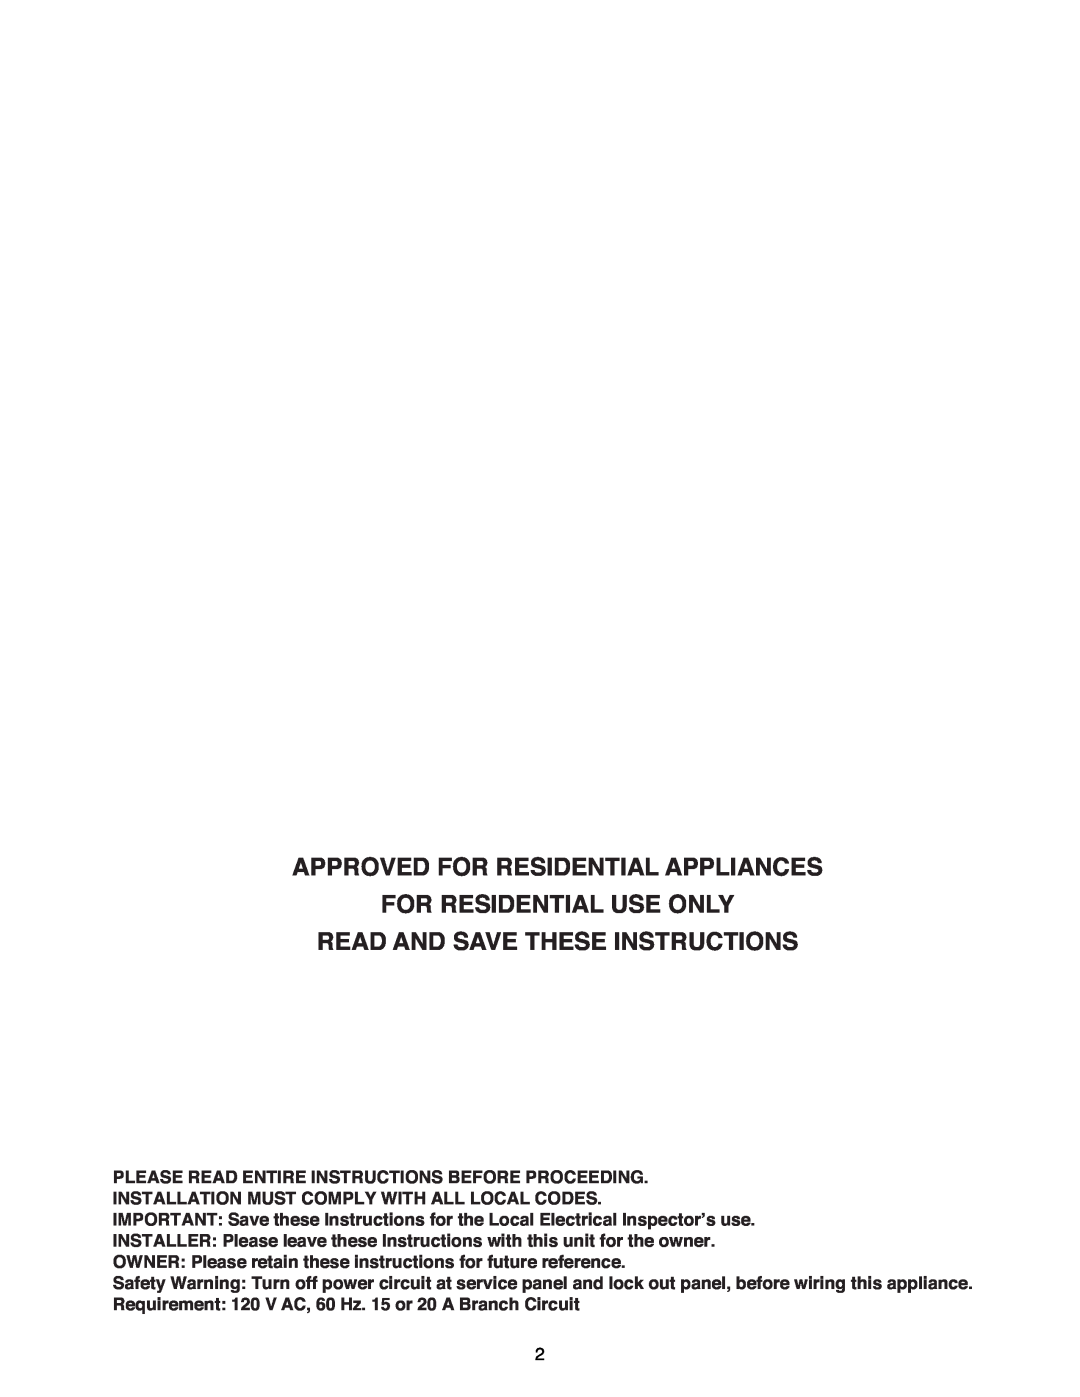 Thermador HPWB36, HPWB48 Approved For Residential Appliances For Residential Use Only, Read And Save These Instructions 